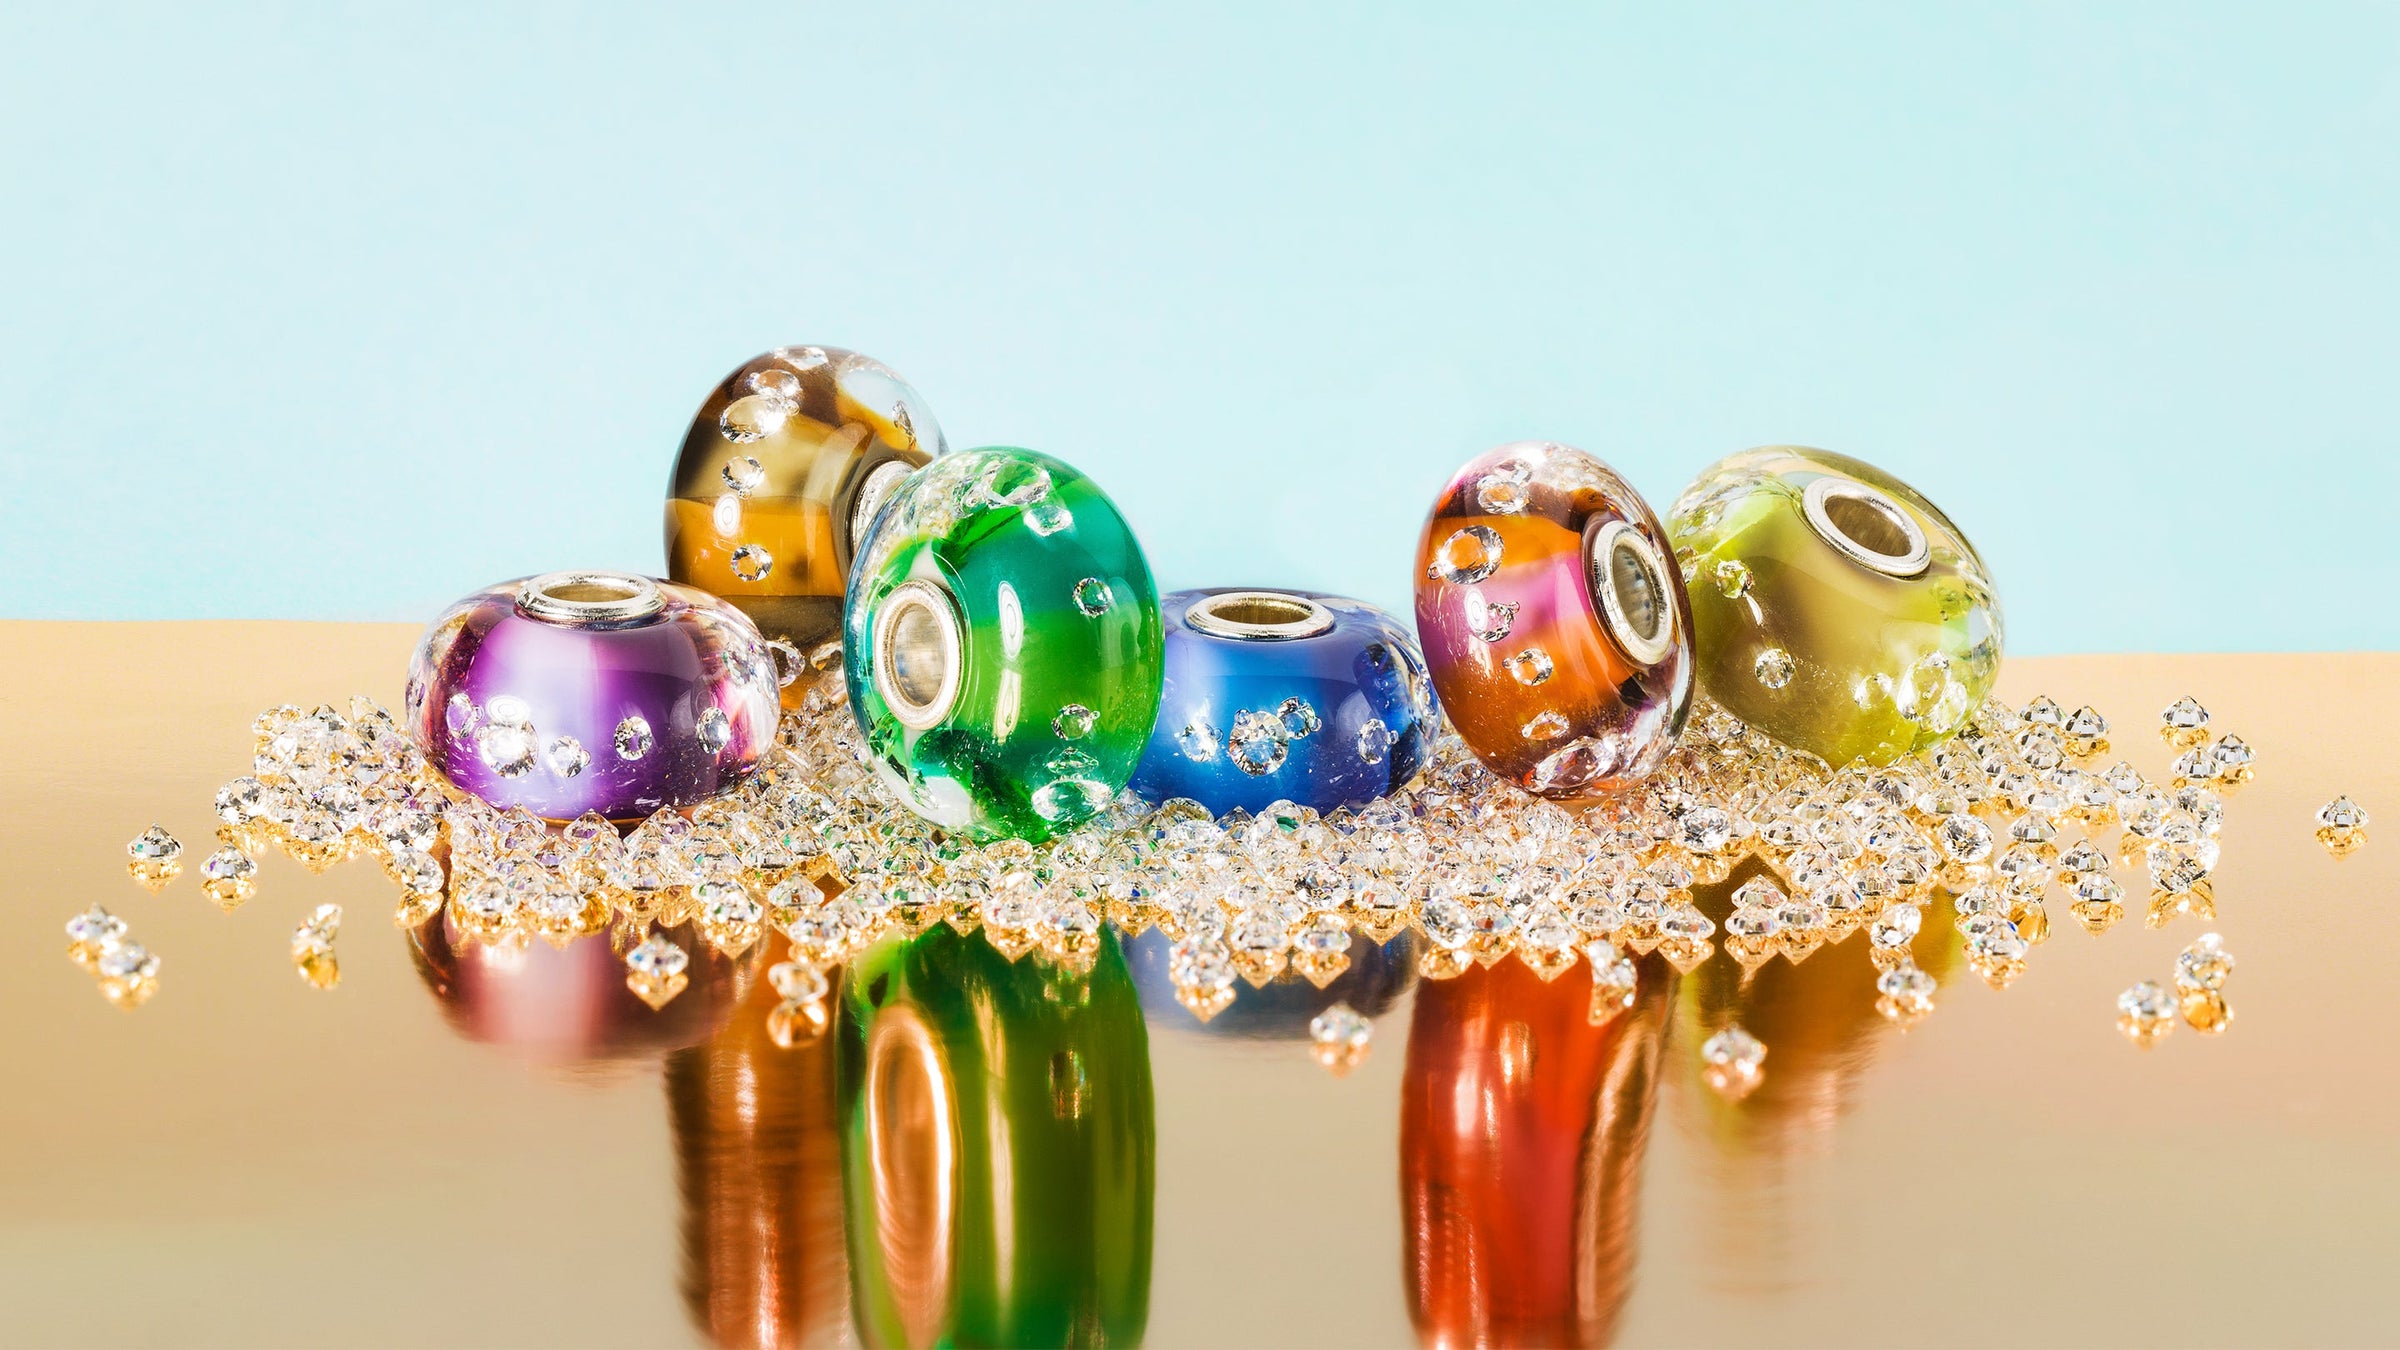 6 new Murano glass beads sparkling with 13 zirconia embedded over a layer of delicate two-toned pastels, on a bed of Zirconia